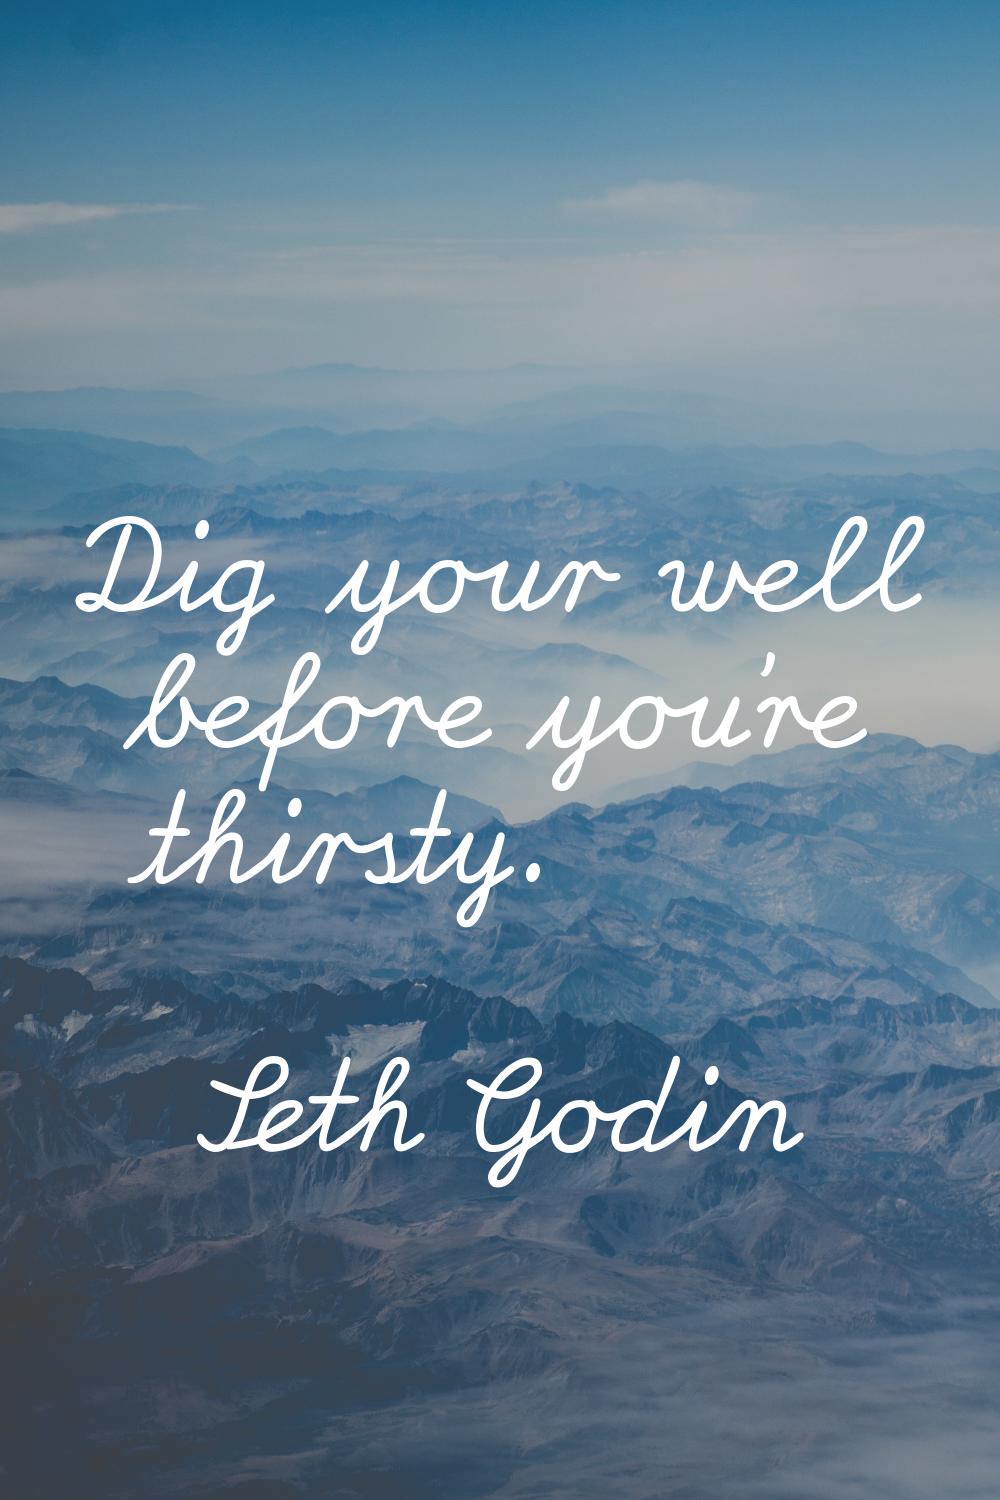 Dig your well before you're thirsty.